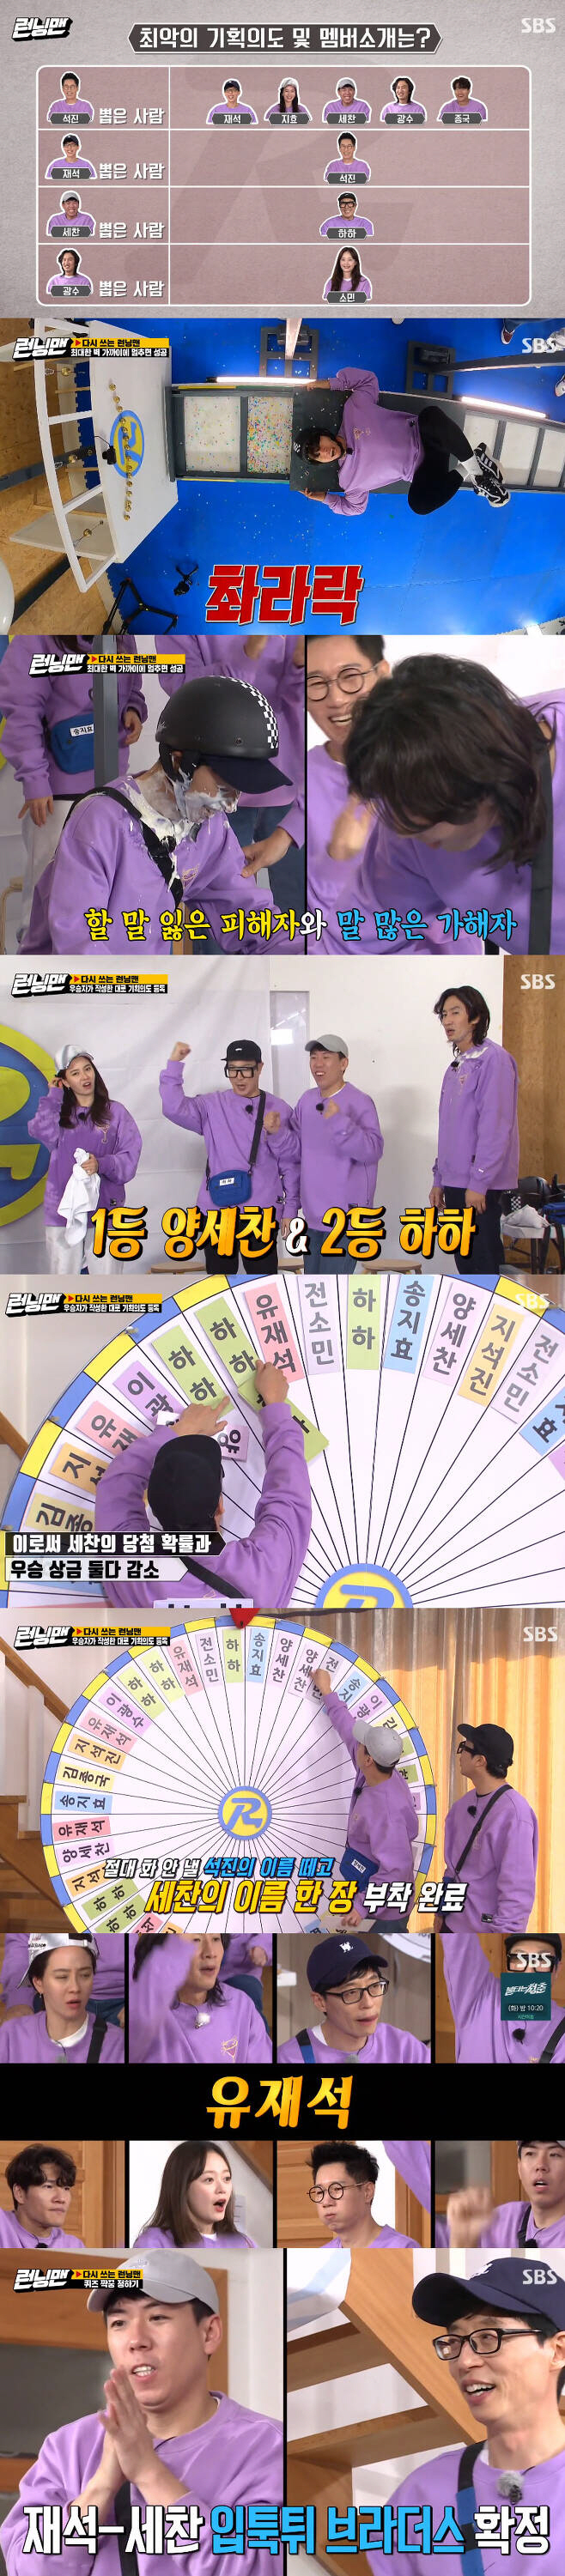 The SBS entertainment program Running Man, which was broadcast on the 17th, was decorated with the second Running Man.On this day, the members played a confrontation to change the planning intention and member introduction written on the official website of Running Man to their own writing.The main character of the introduction changes, which are rampant with diss about each other, was decided through roulette; the winning member through games and quizzes was able to take more compartments to roulette.As a result of the fierce game, Lee Kwang-soo secured 8 roulette partitions, Haha 7, Yang Se-chan 6, Song Ji-hyo 5, Yo Jae-Suk 4, Jeon So-min 4 and Kim Jong-guk 3 and Ji Seok-jin 3.With Lee Kwang-soo and Haha overwhelmingly favorable, Roulette turned and the result of the reversal came: Yoo Jae-Suk, who only secured four spaces, won.Yoo Jae-Suk received a manuscript fee of 400,000 won from the production team.The members sighed, Yoo Jae-Suks Running Man was right. Yo Jae-Suk laughed and expressed joy.On the other hand, all the photos of other members were changed to humiliation (?).In the introduction to Ji Seok-jin, Ji Seok-jin tried to fall in the early days, but now Running Man is the best, and he is buying a lot of money around him. Kim Jong-guk wrote, The ceremony is also a hateful baby to take moreHahas introduction reads, The Running Man official Slack, a father and father of three children.I still do not know myself, I do not want to admit it, he said. I recently sent a kimono to me. Song Ji-hyo said, I can not say that there is a lot of chemistry with Running Man members, but I can not say that it is not. Lee Kwang-soo wrote, Star Butler who does not make an effort even though he can be up to 3m tall.For Jeon So-min and Yang Se-chan, I have watched for a long time and I have been right and I swear Kim Jong-guk behind me.I plan to kill him once he pretends not to know, he laughed.